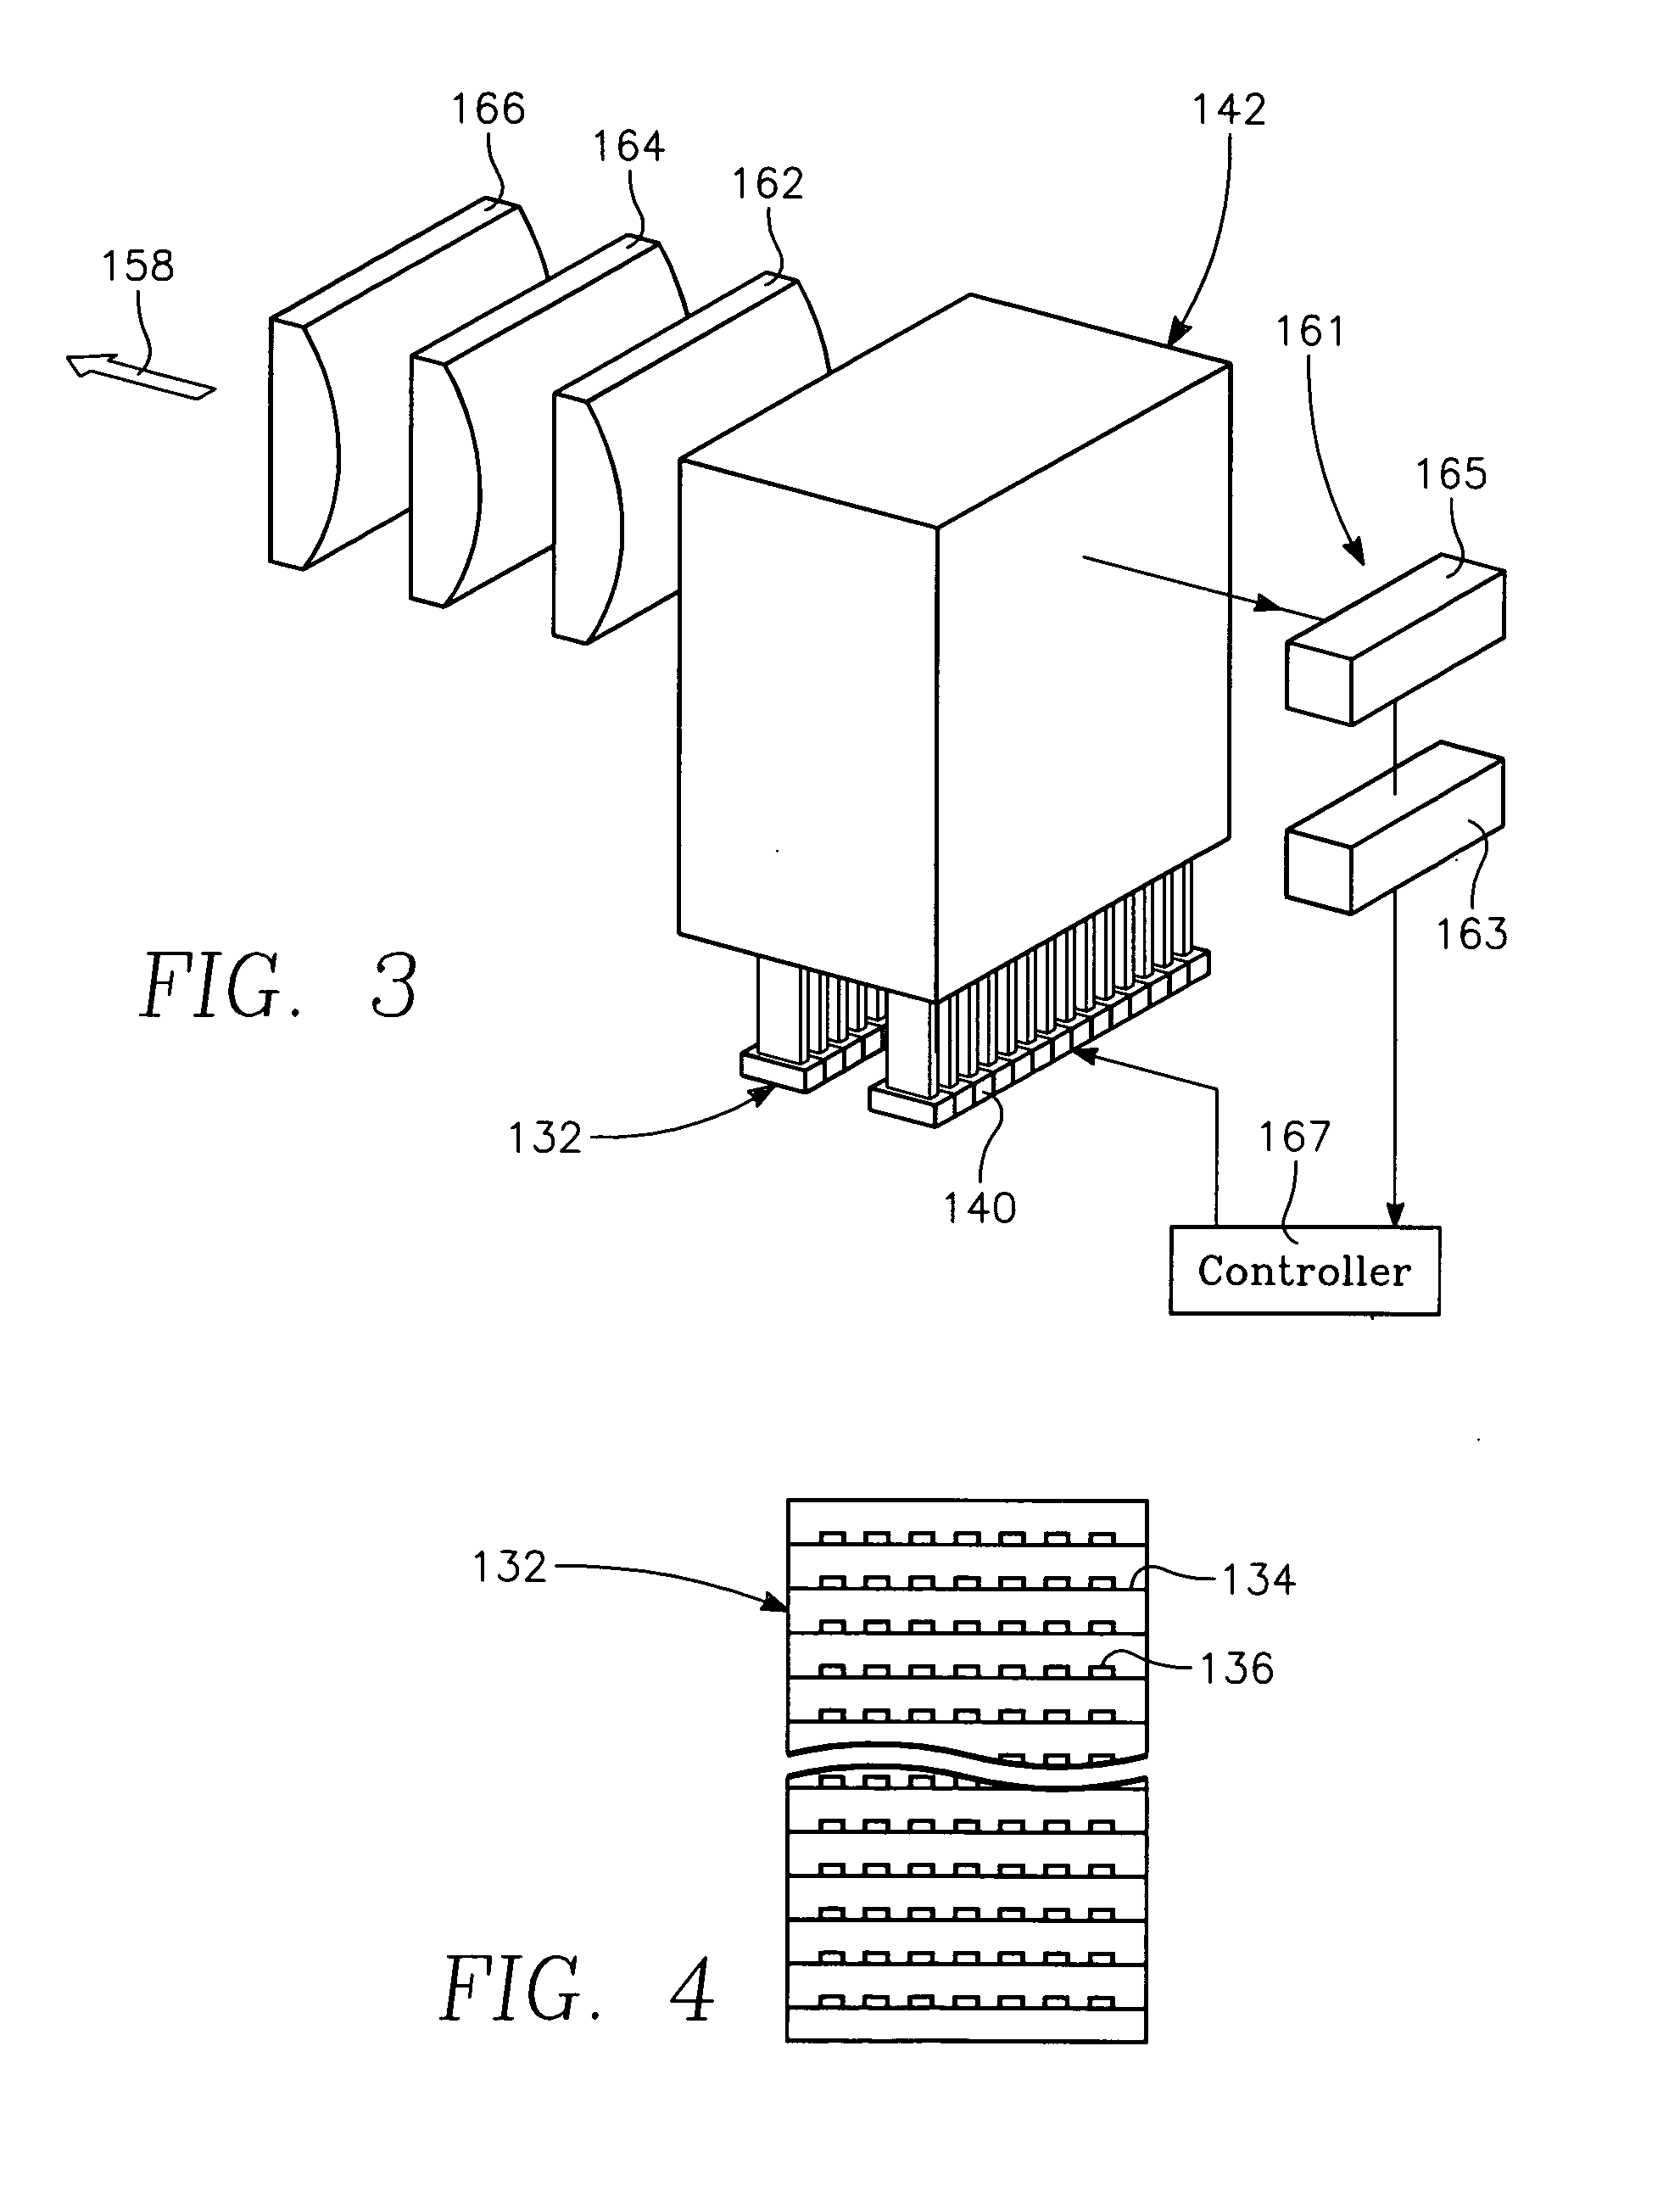 Copper conductor annealing process employing high speed optical annealing with a low temperature-deposited optical absorber layer